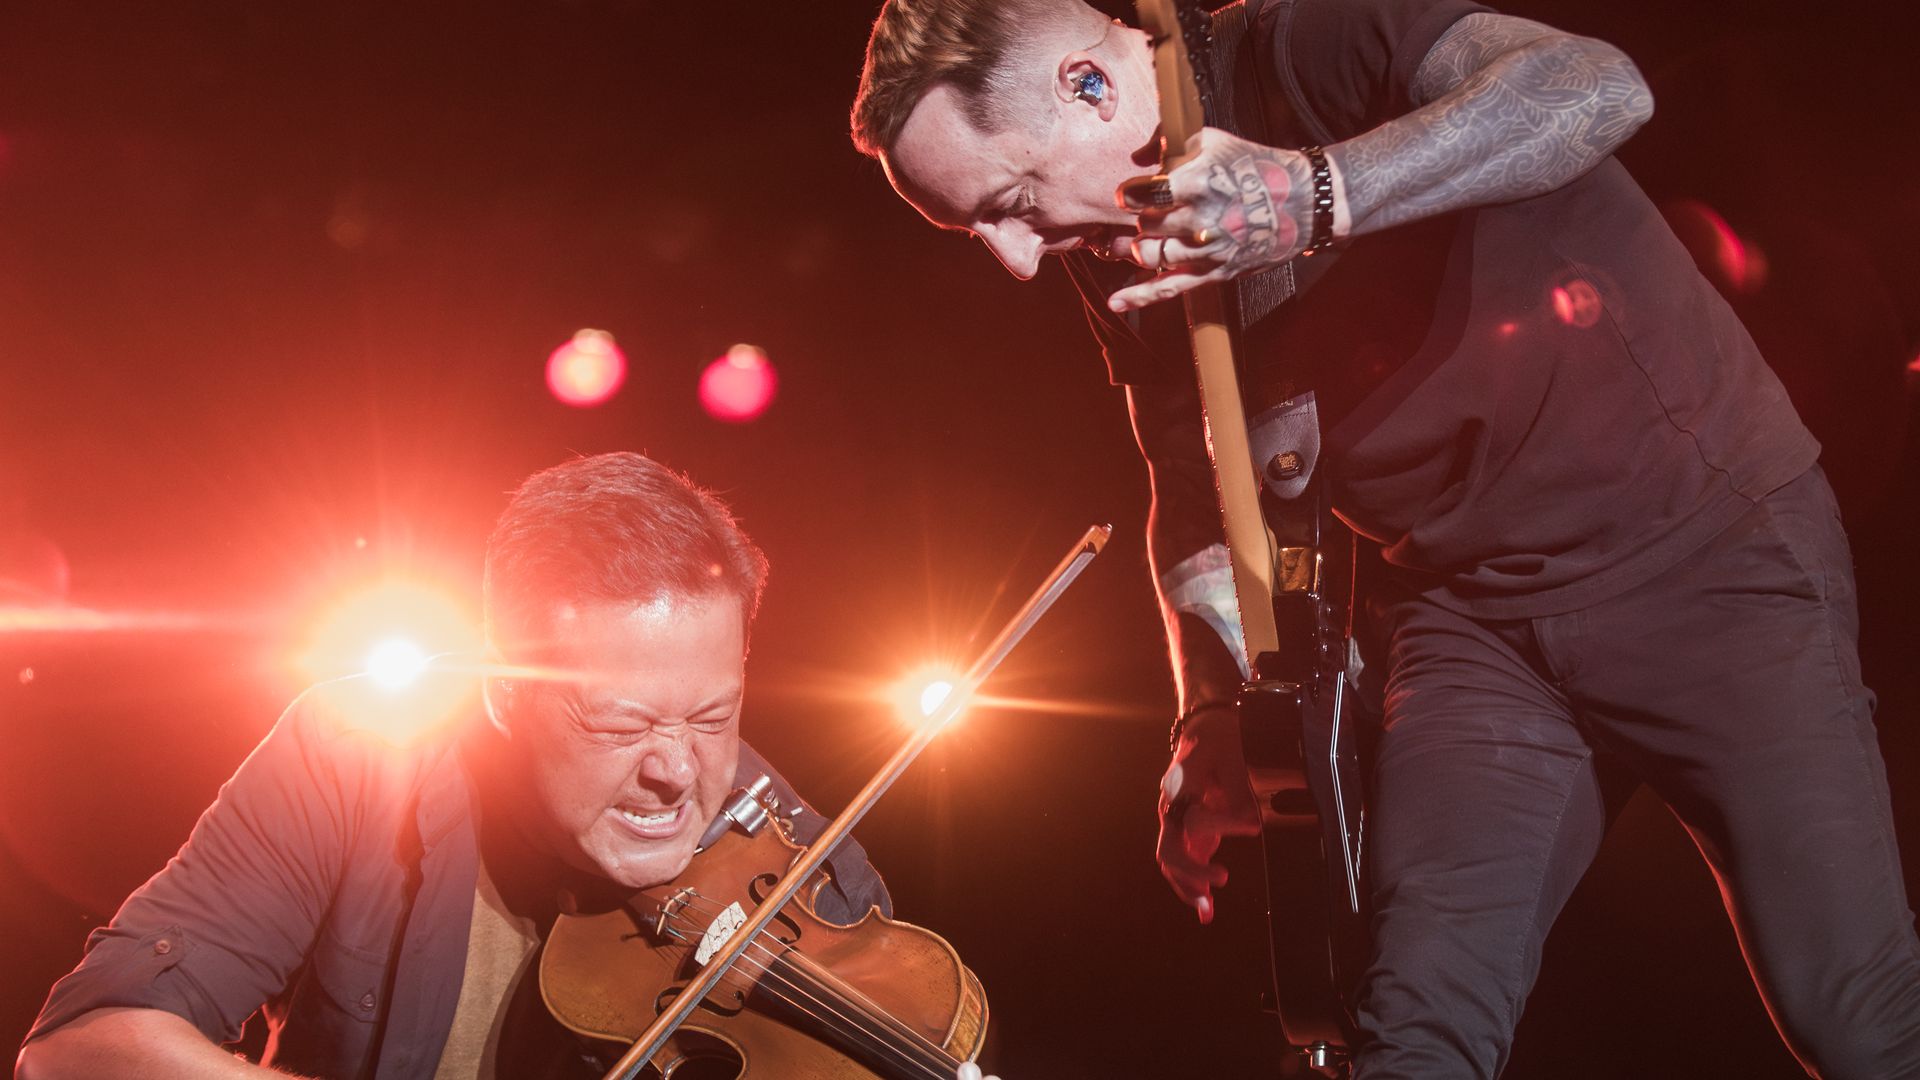 The violinist and guitarist from Yellowcard perform. 